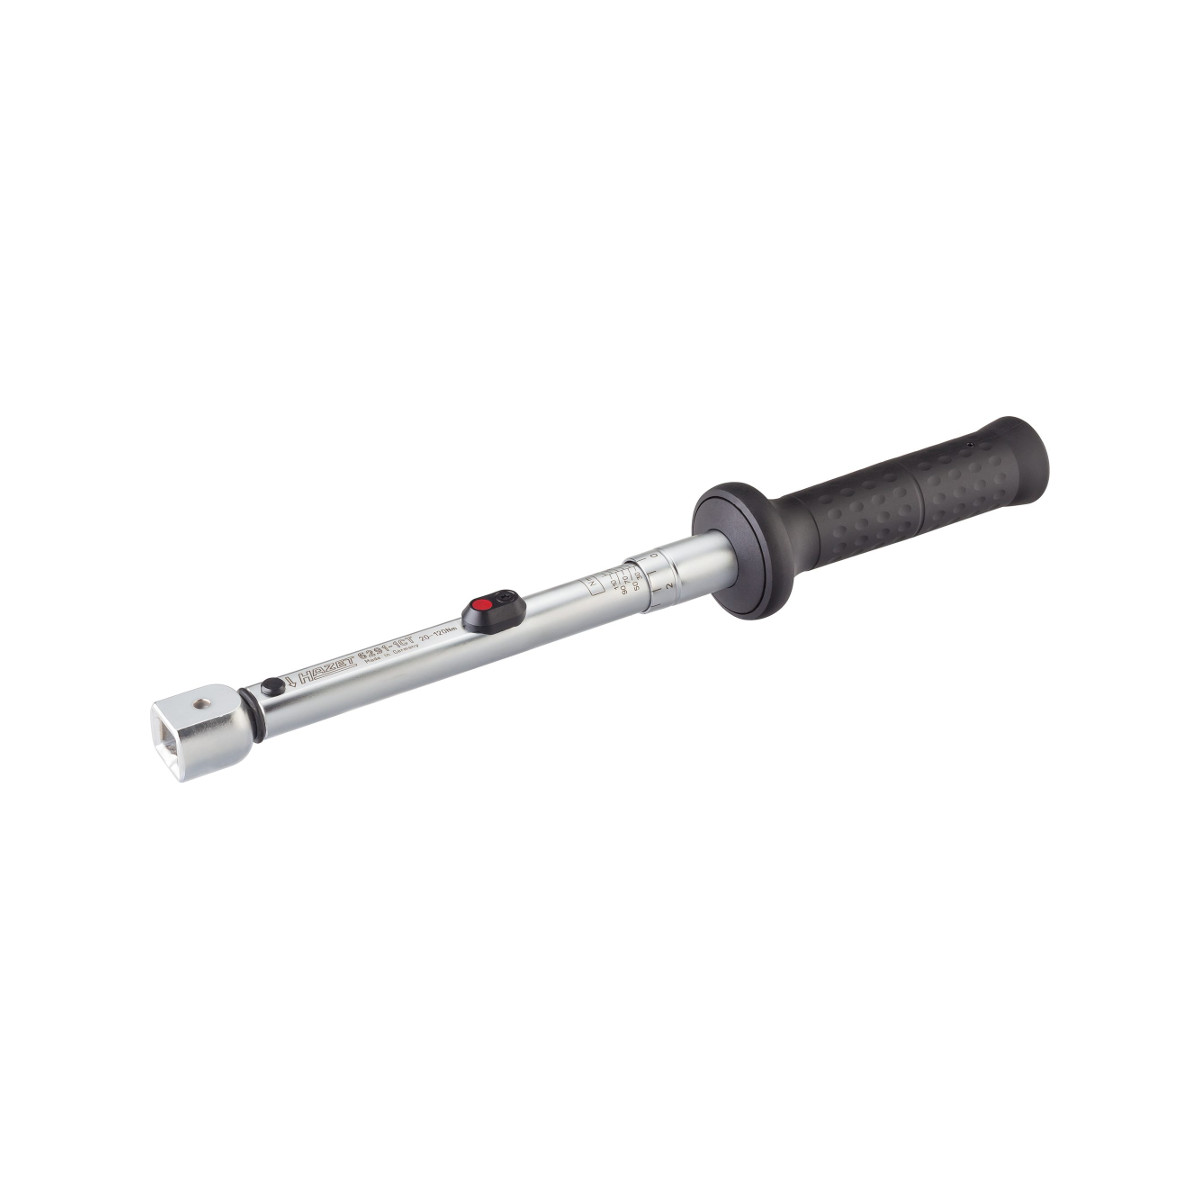 HAZET 6291-1CT Torque wrench for insert tools 14 x 18, 20 - 120 Nm